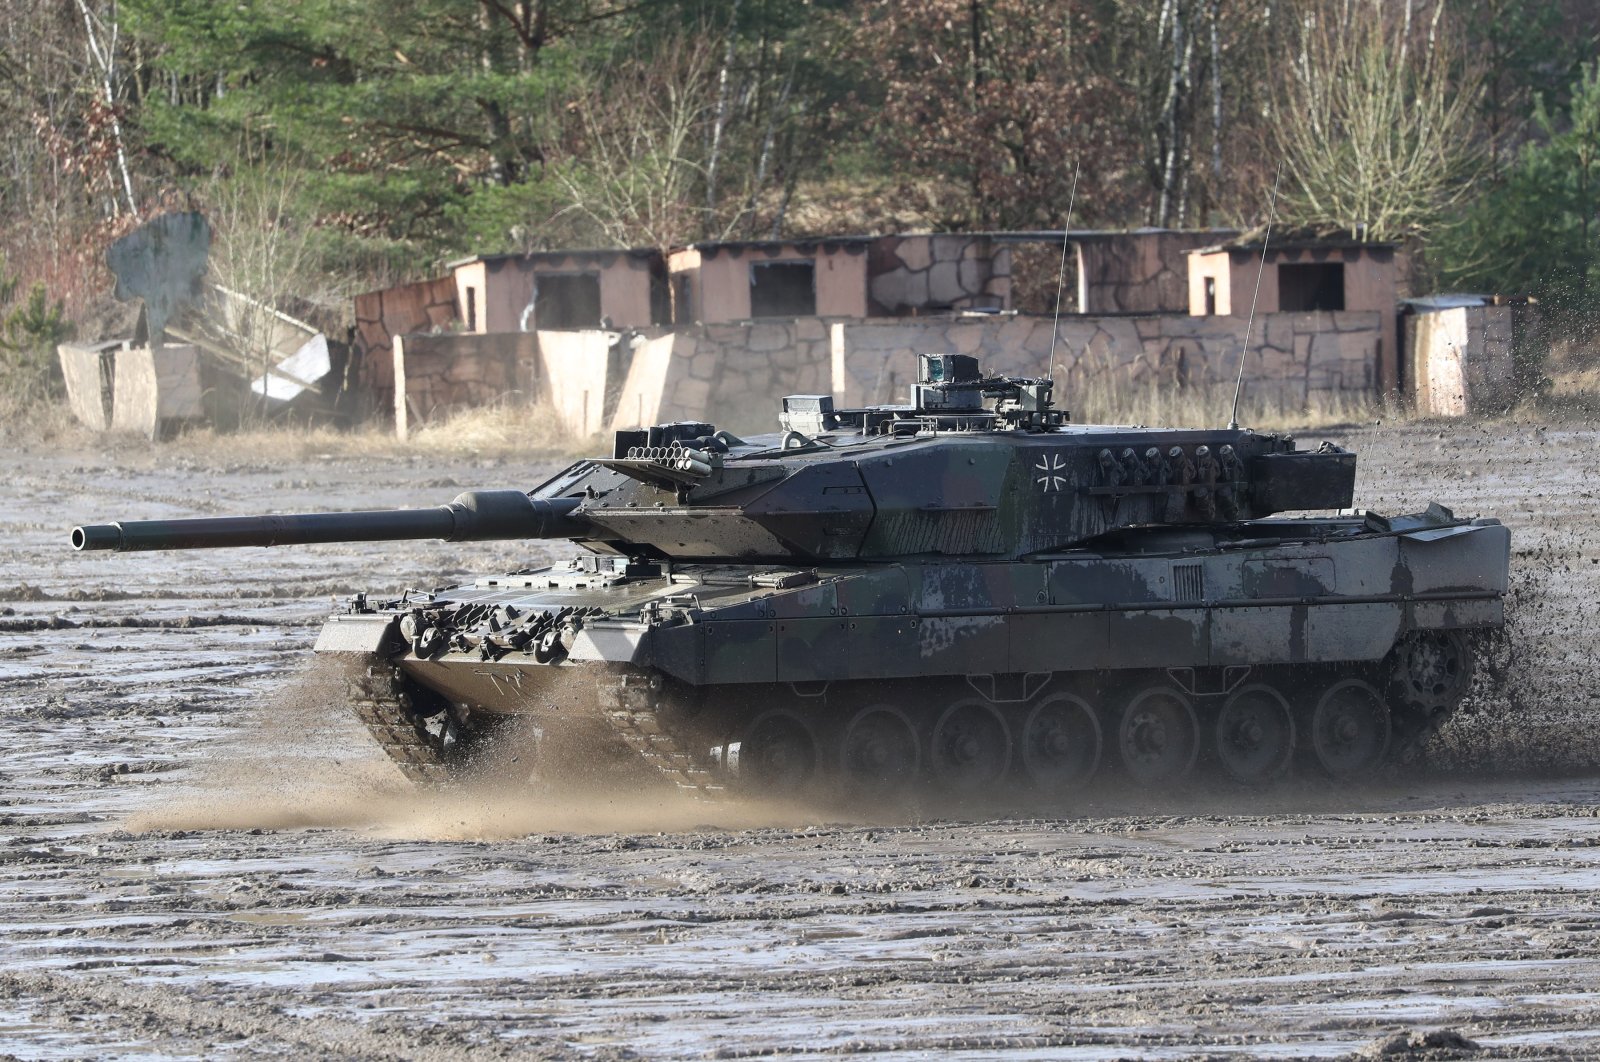 A Leopard 2 combat tank in action during the visit of German Minister of Defense Christine Lambrecht at the 9th Panzerlehr Brigade of the German Bundeswehr in Munster, northern Germany, Feb. 7, 2022. (EPA Photo)